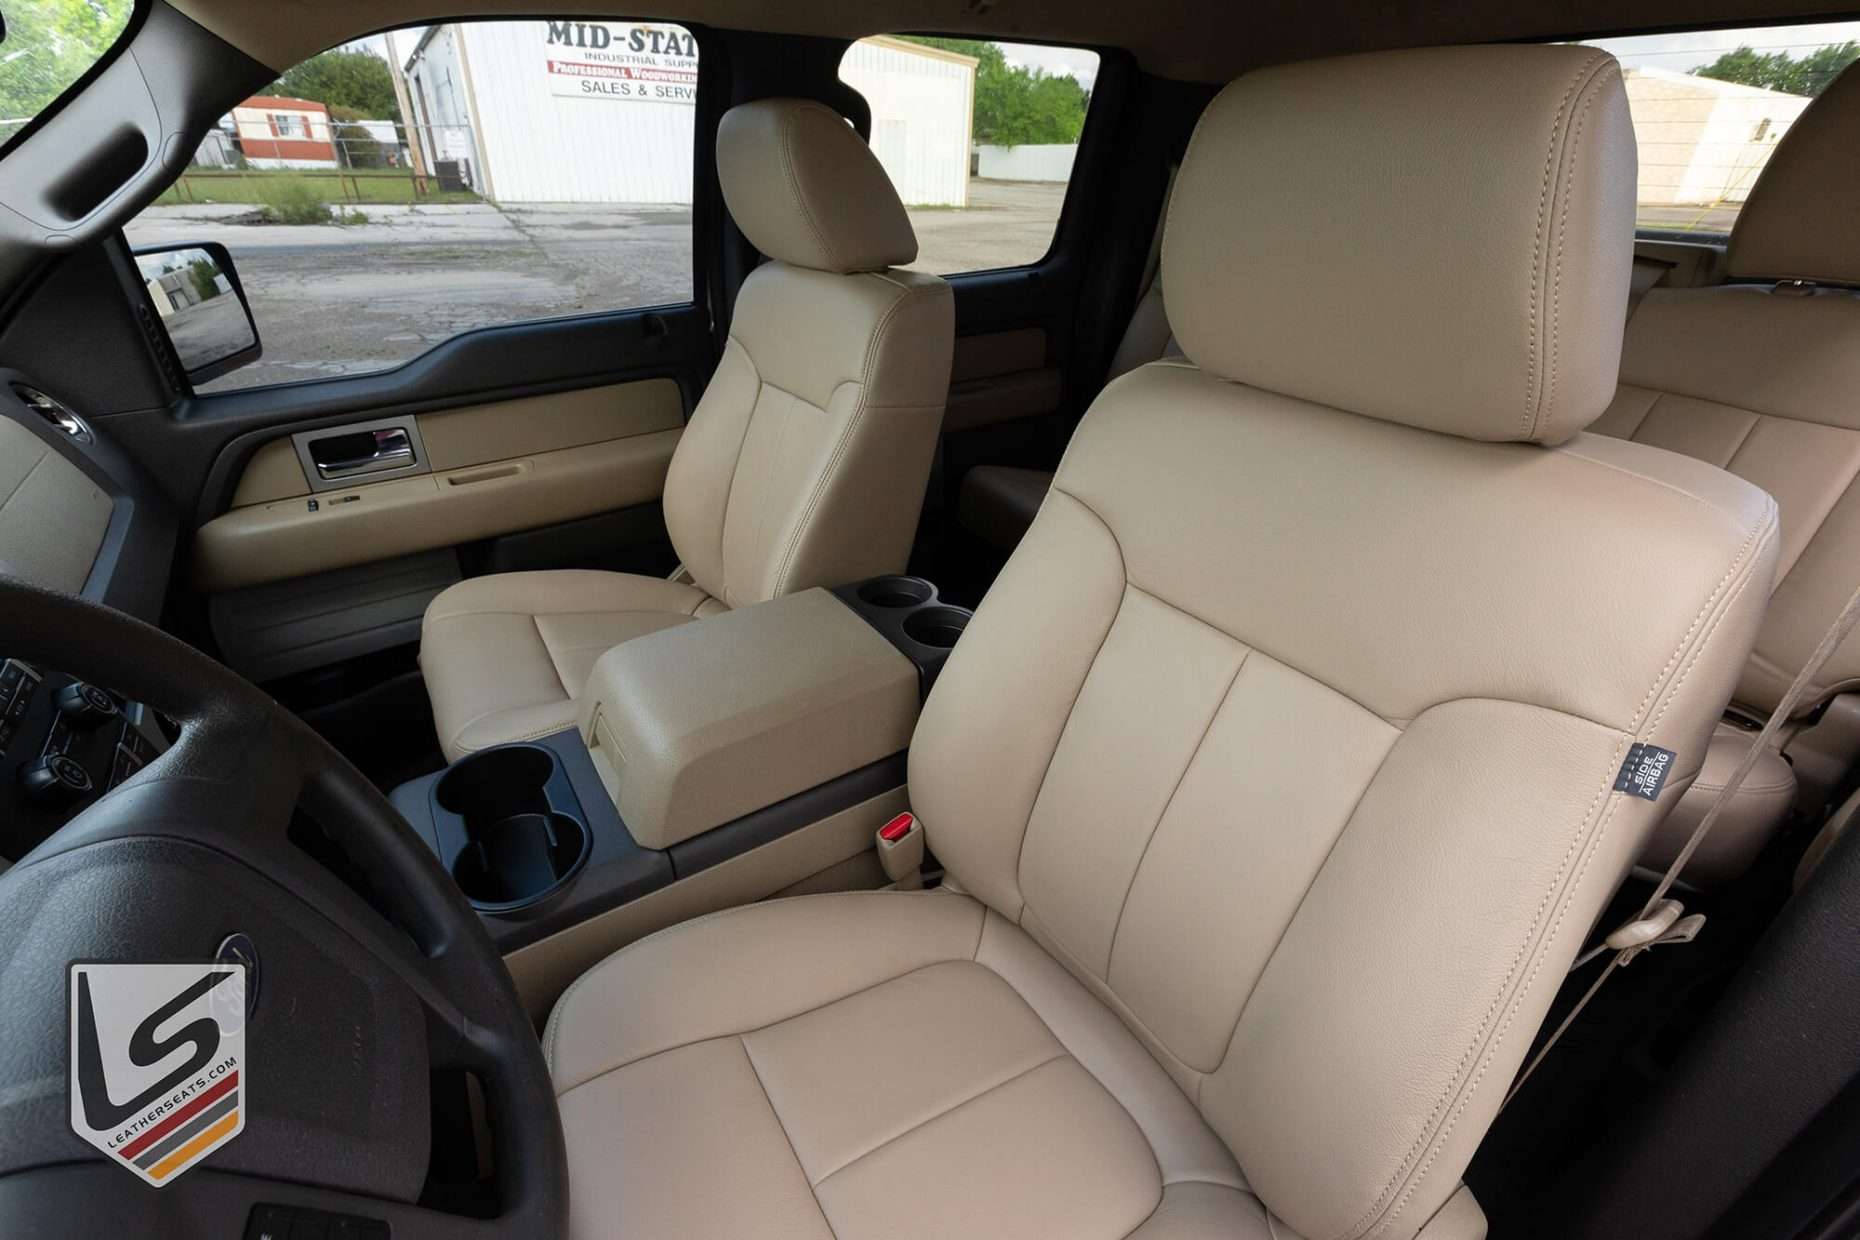 2009-2014 Ford F-150 with leather seats - Front row